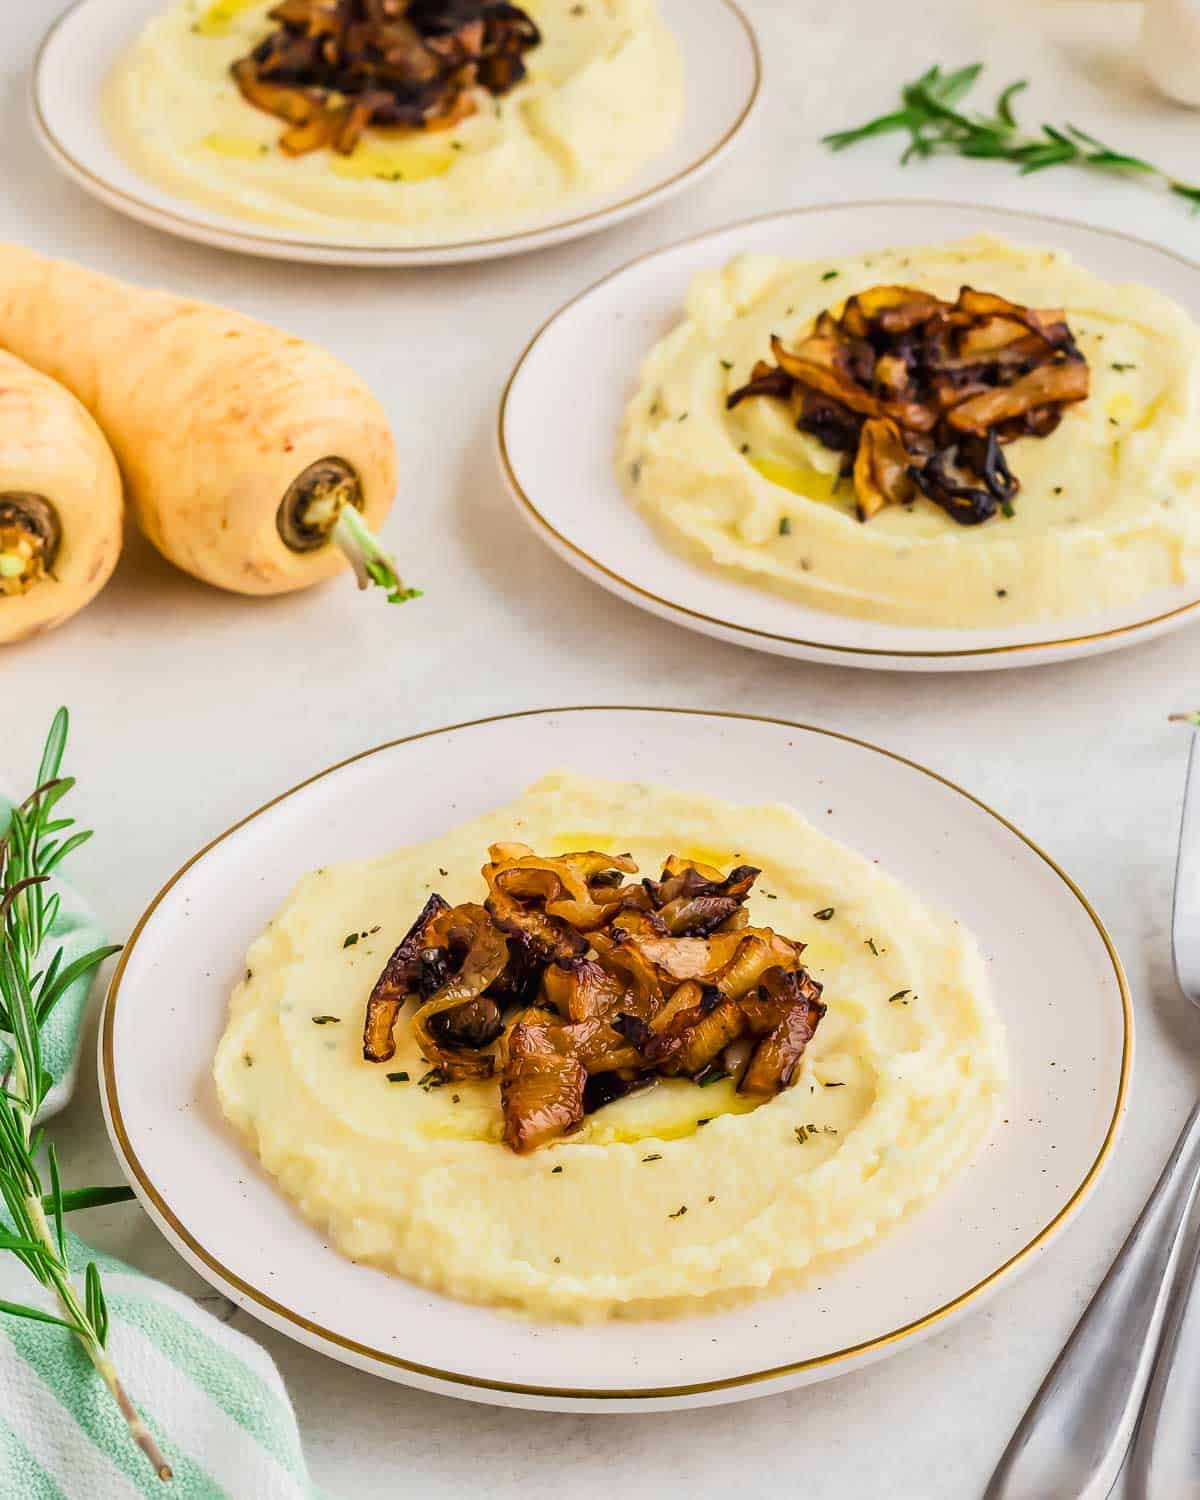 Parsnip puree topped with caramelized onions on a white plate, garnished with fresh herbs.